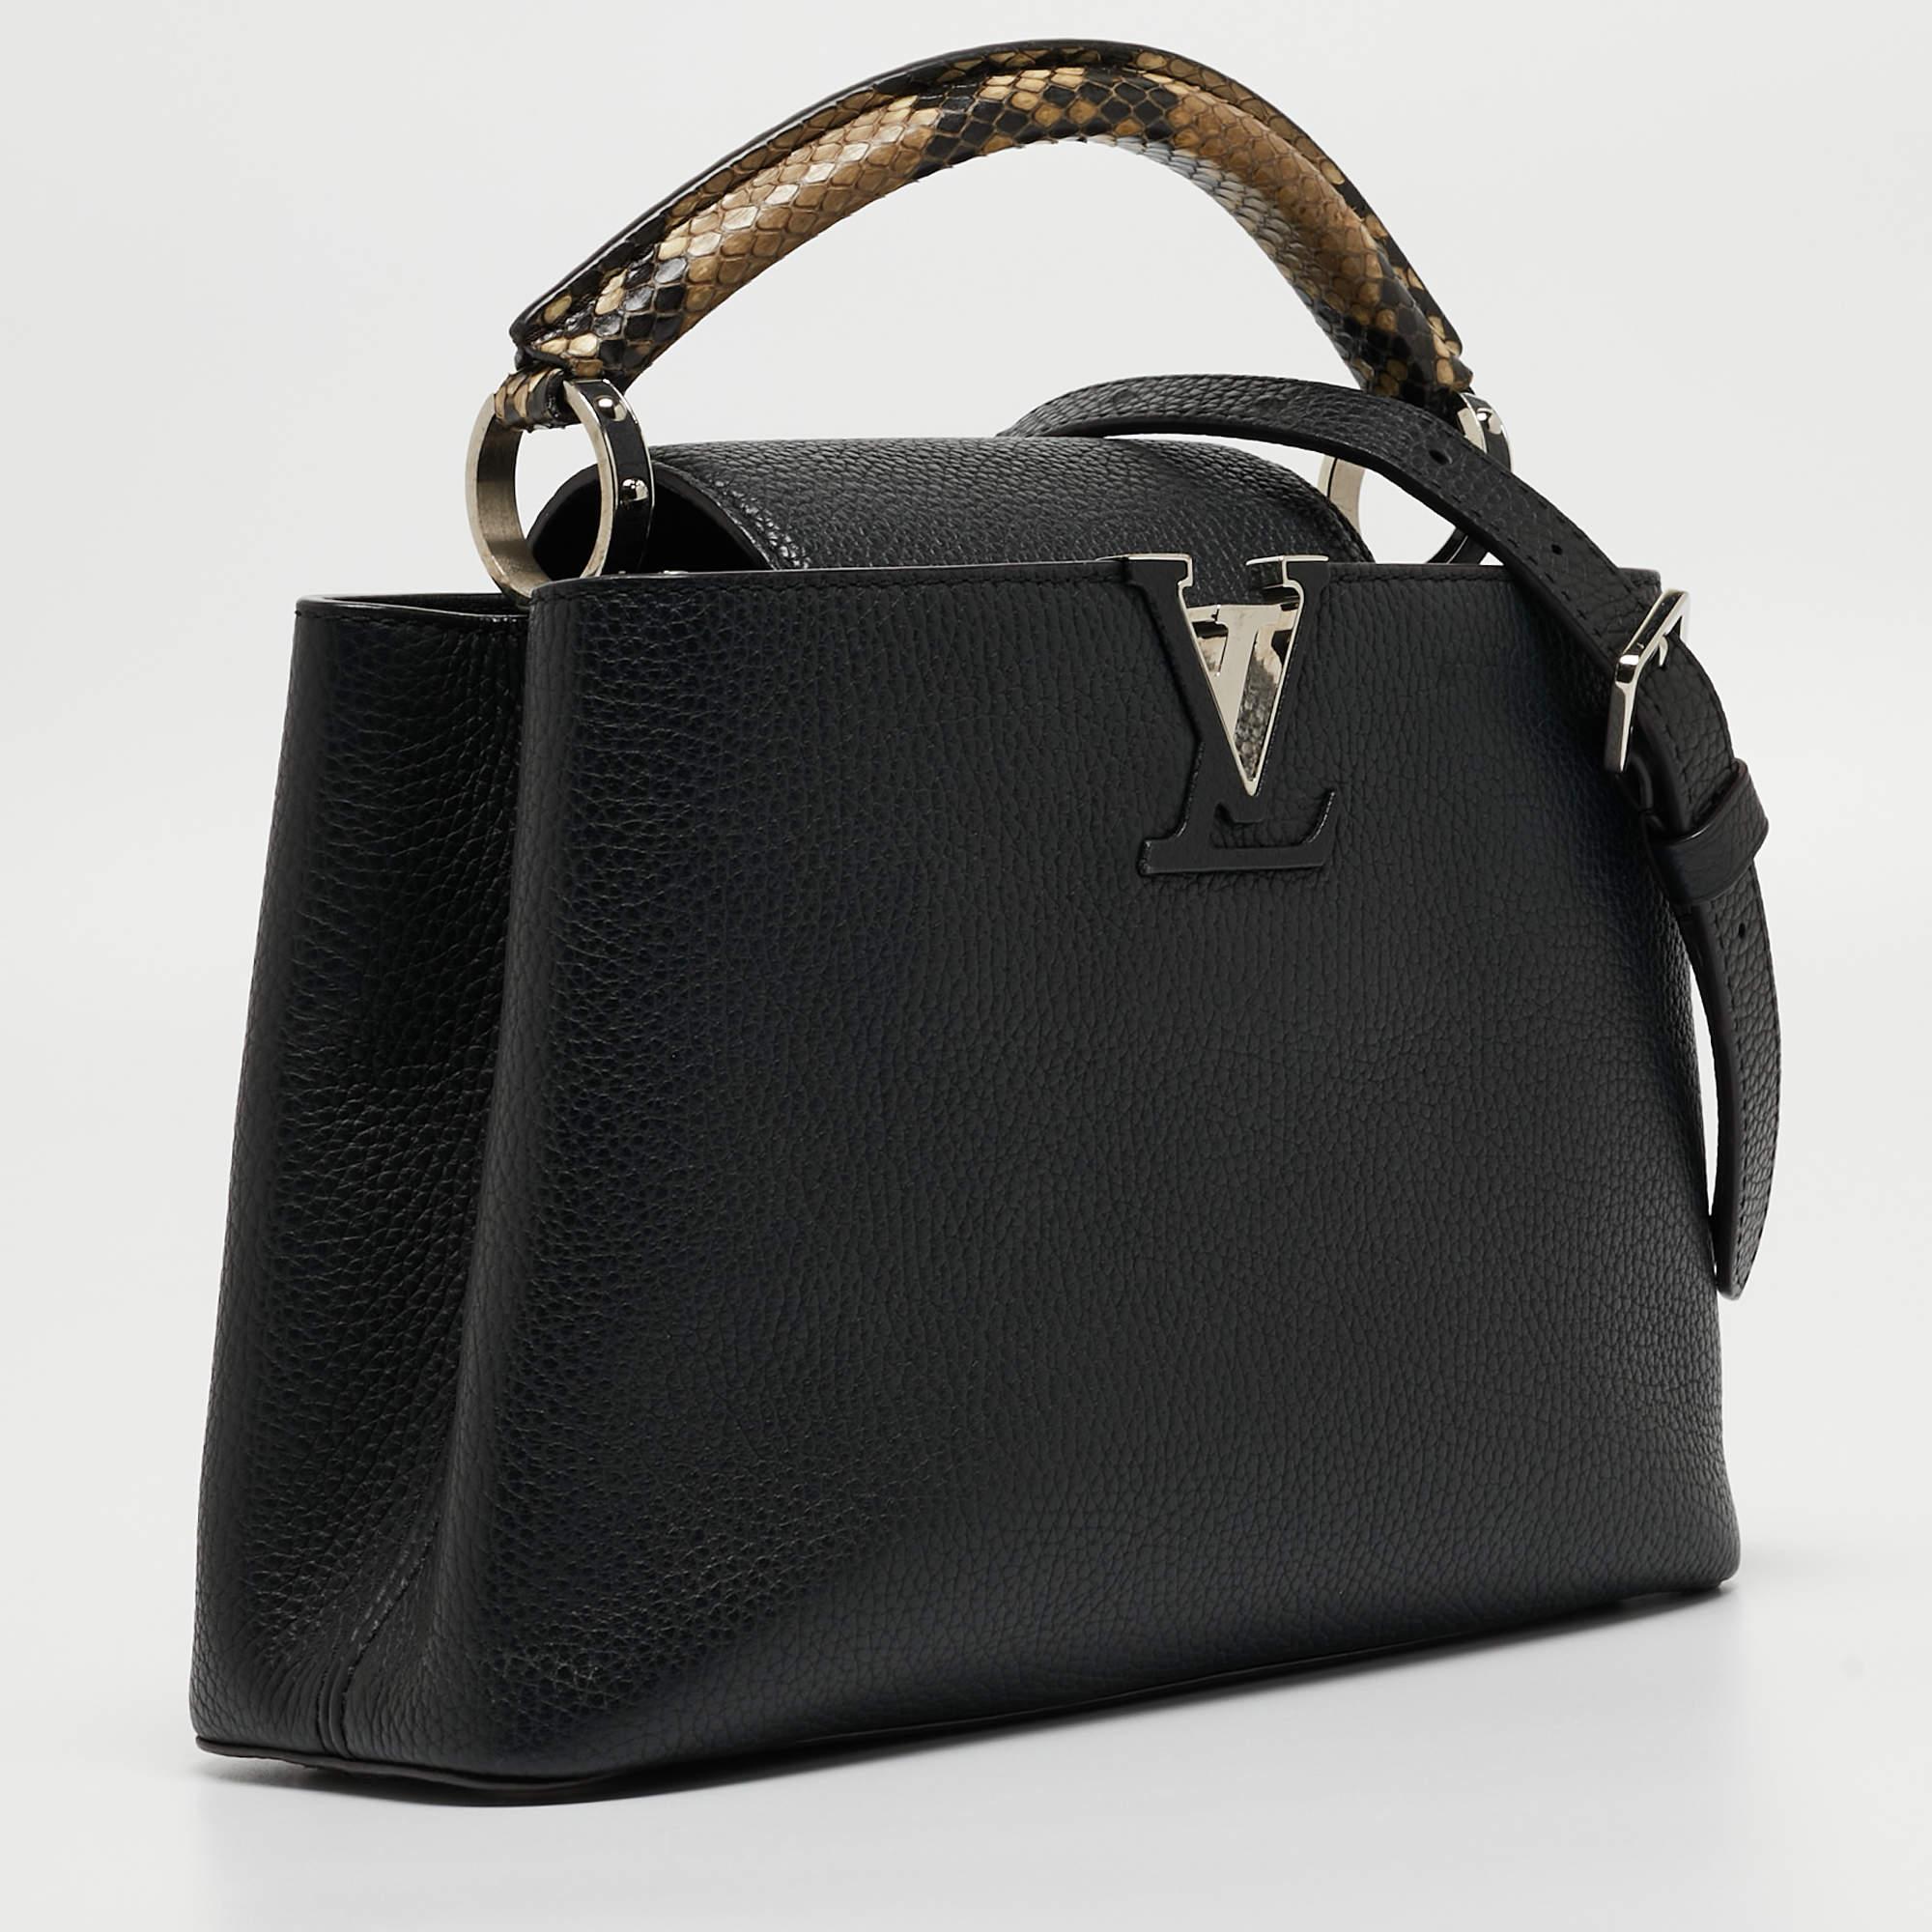 Your closet will always have space for this Louis Vuitton handbag as appealing as this one. Crafted from Taurillon leather, this Capucines BB bag features a structured design with a single python leather handle and protective metal feet. While the